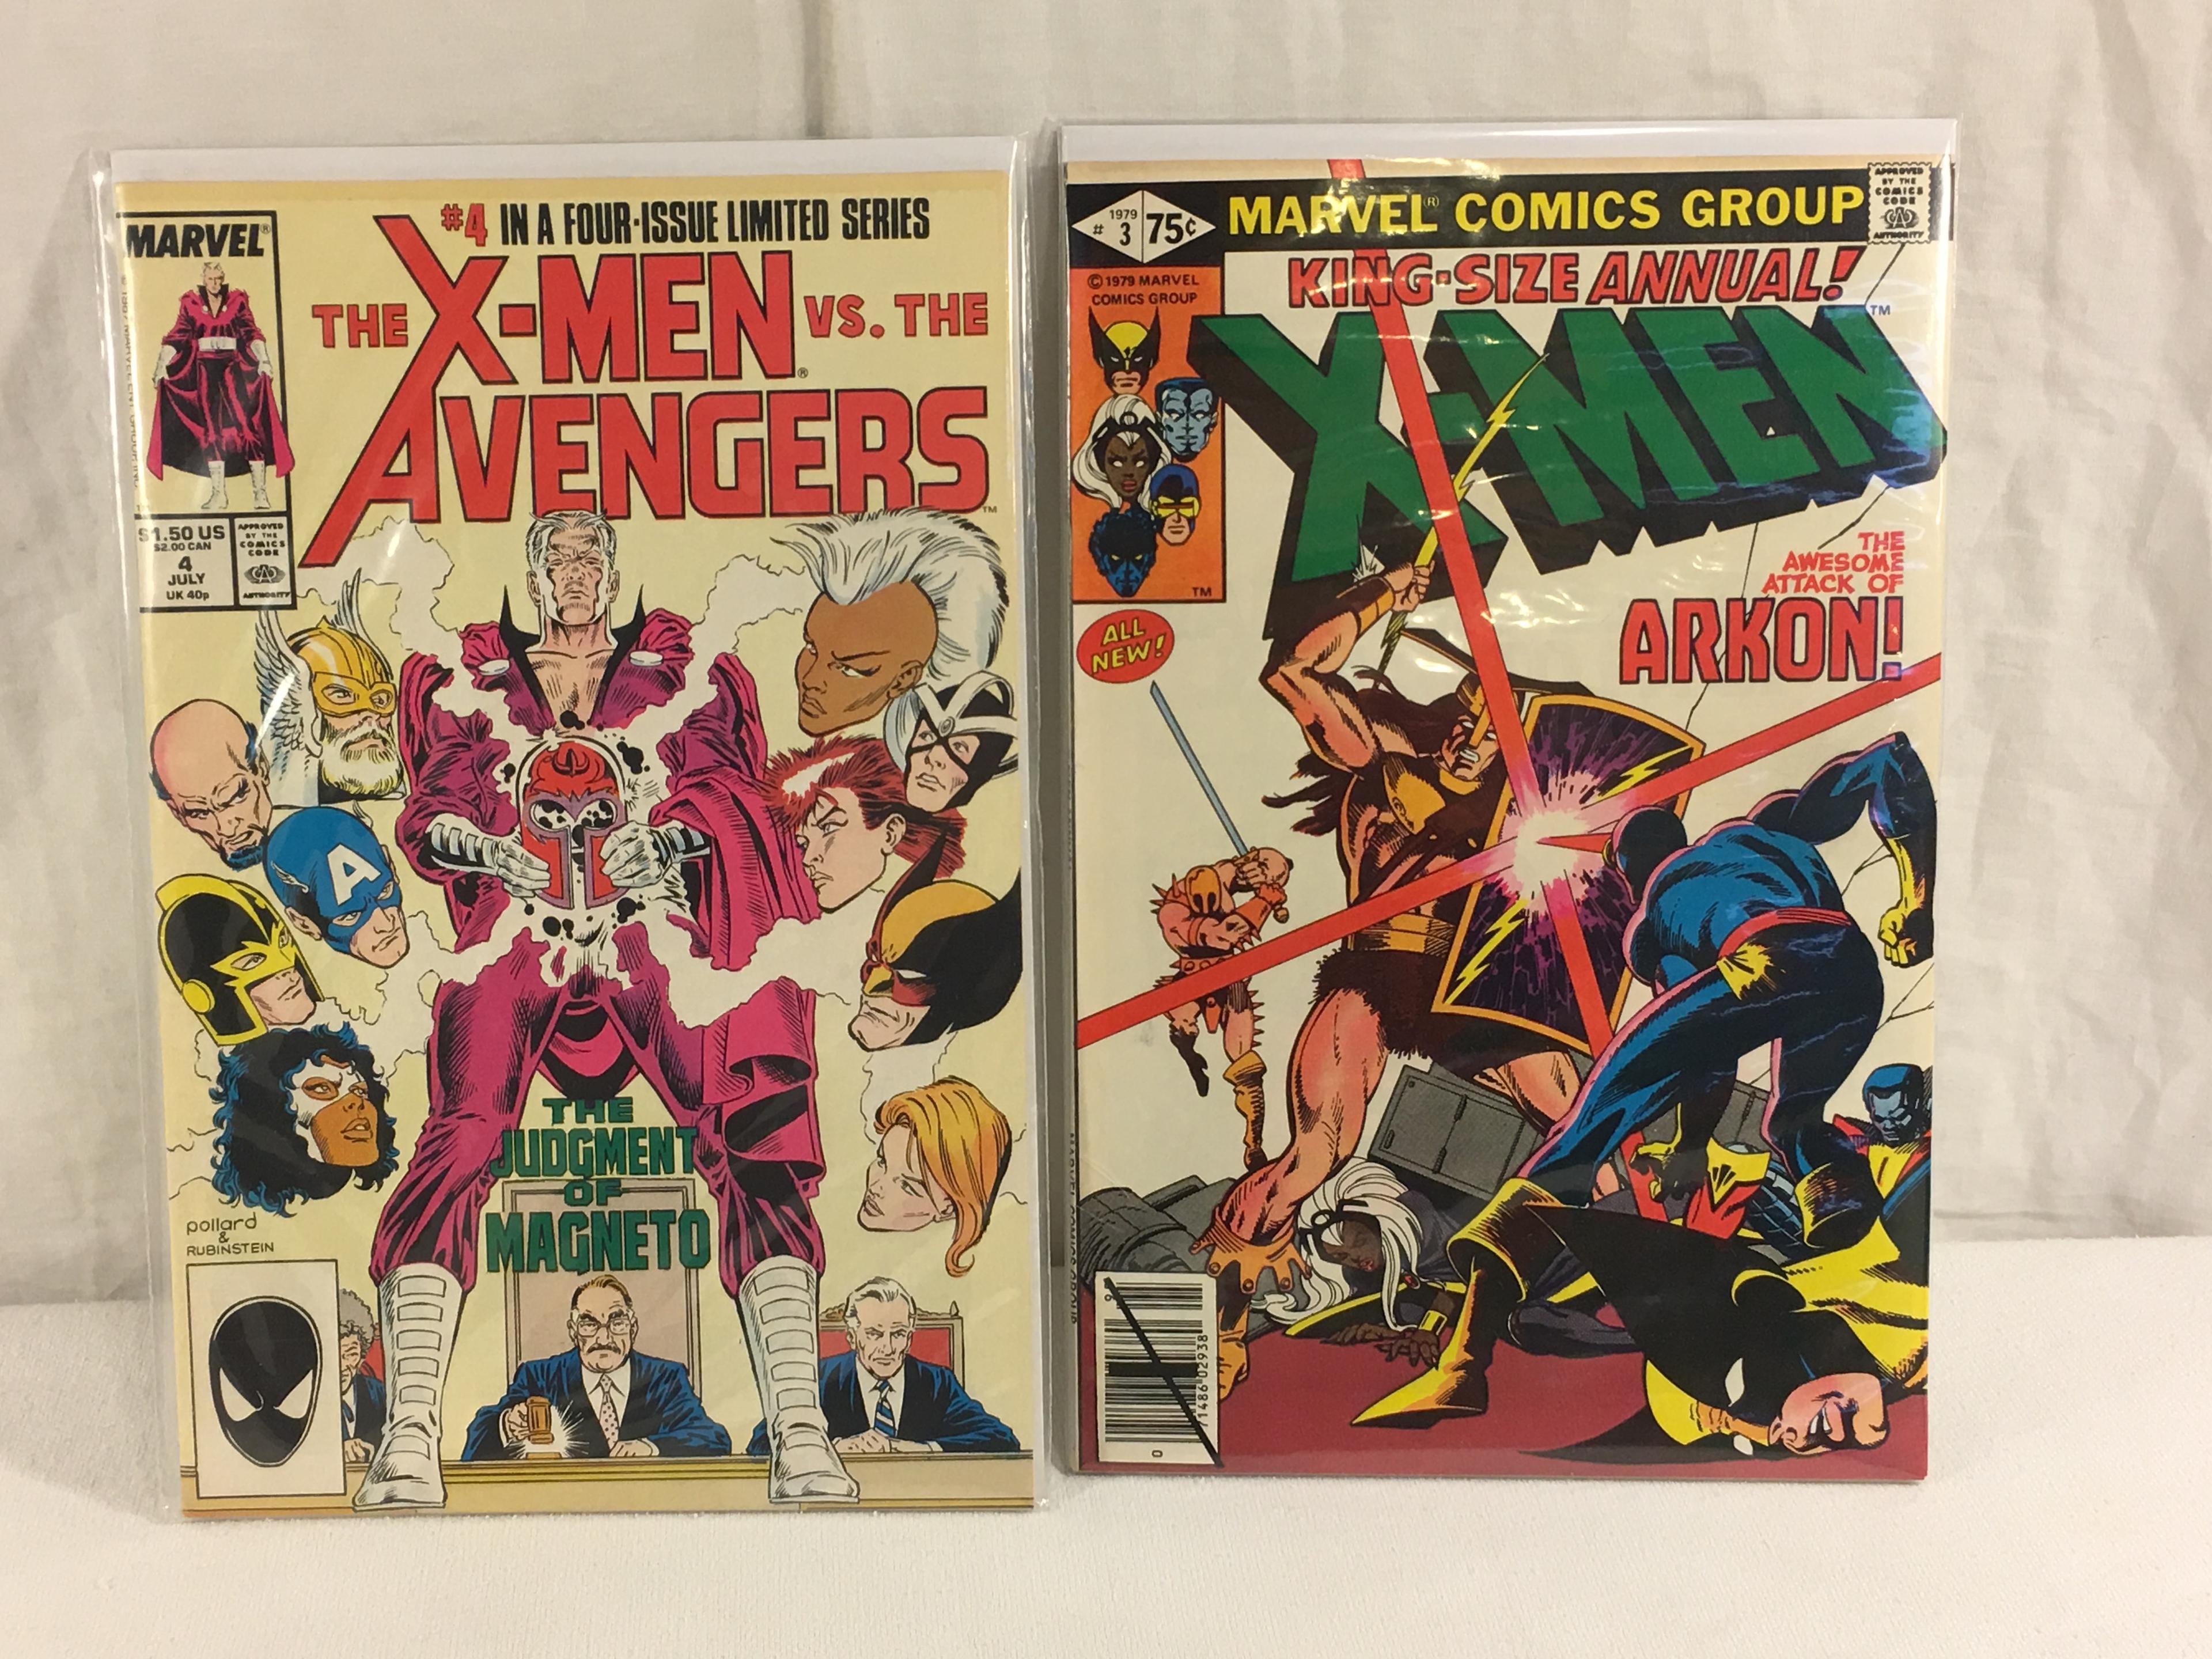 Lot of 2 Colletcor Vintage Marvel King-Size Annual X-Men & Avengers Comic Book No.3.4